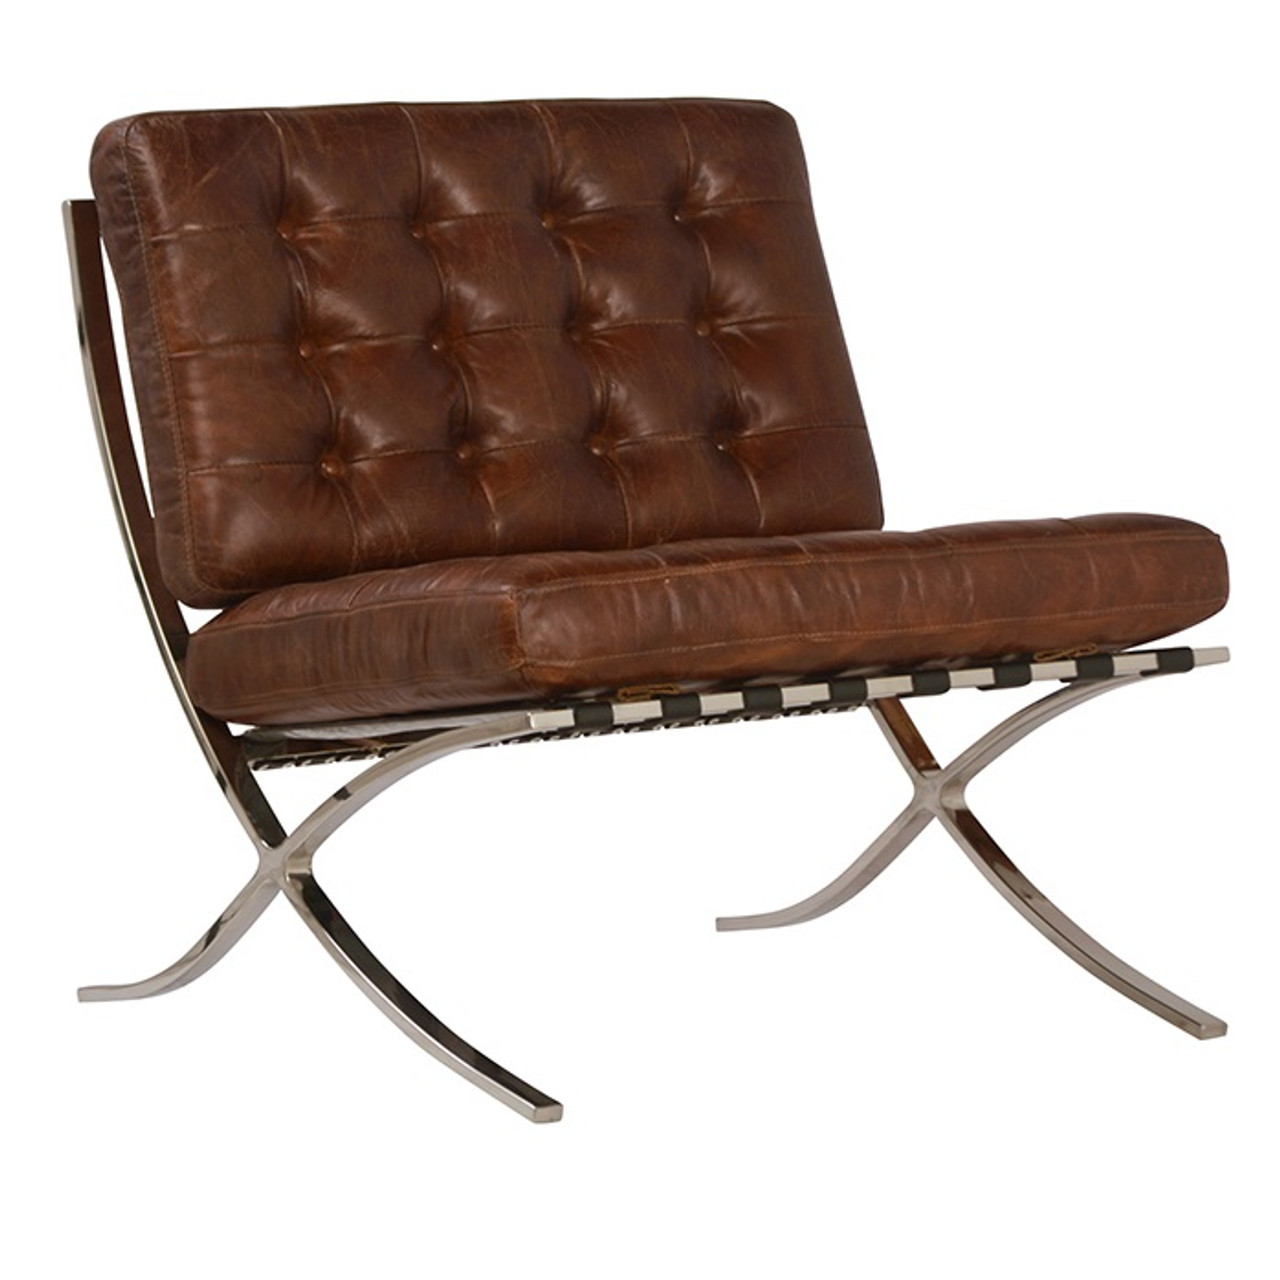 Barcelona Antiqued Brown Leather Lounge Chairs | Zin Home